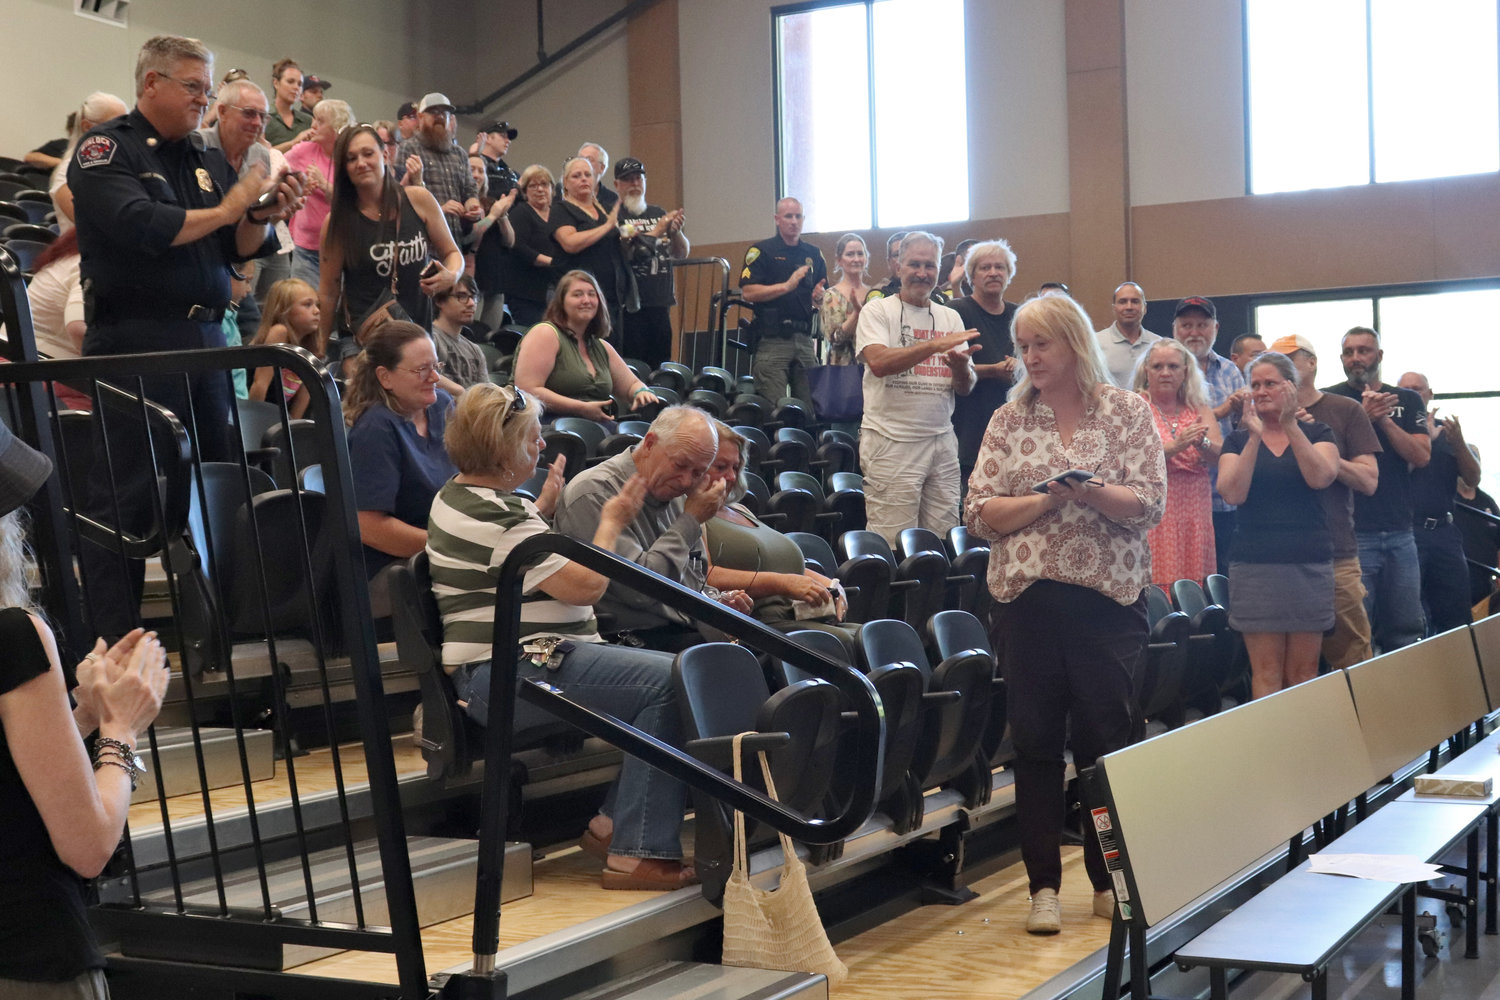 Retired Reserve Sergeant Randy Pennington receives a standing ovation from members of the Toledo community during his retirement party at Toledo High School on Thursday.